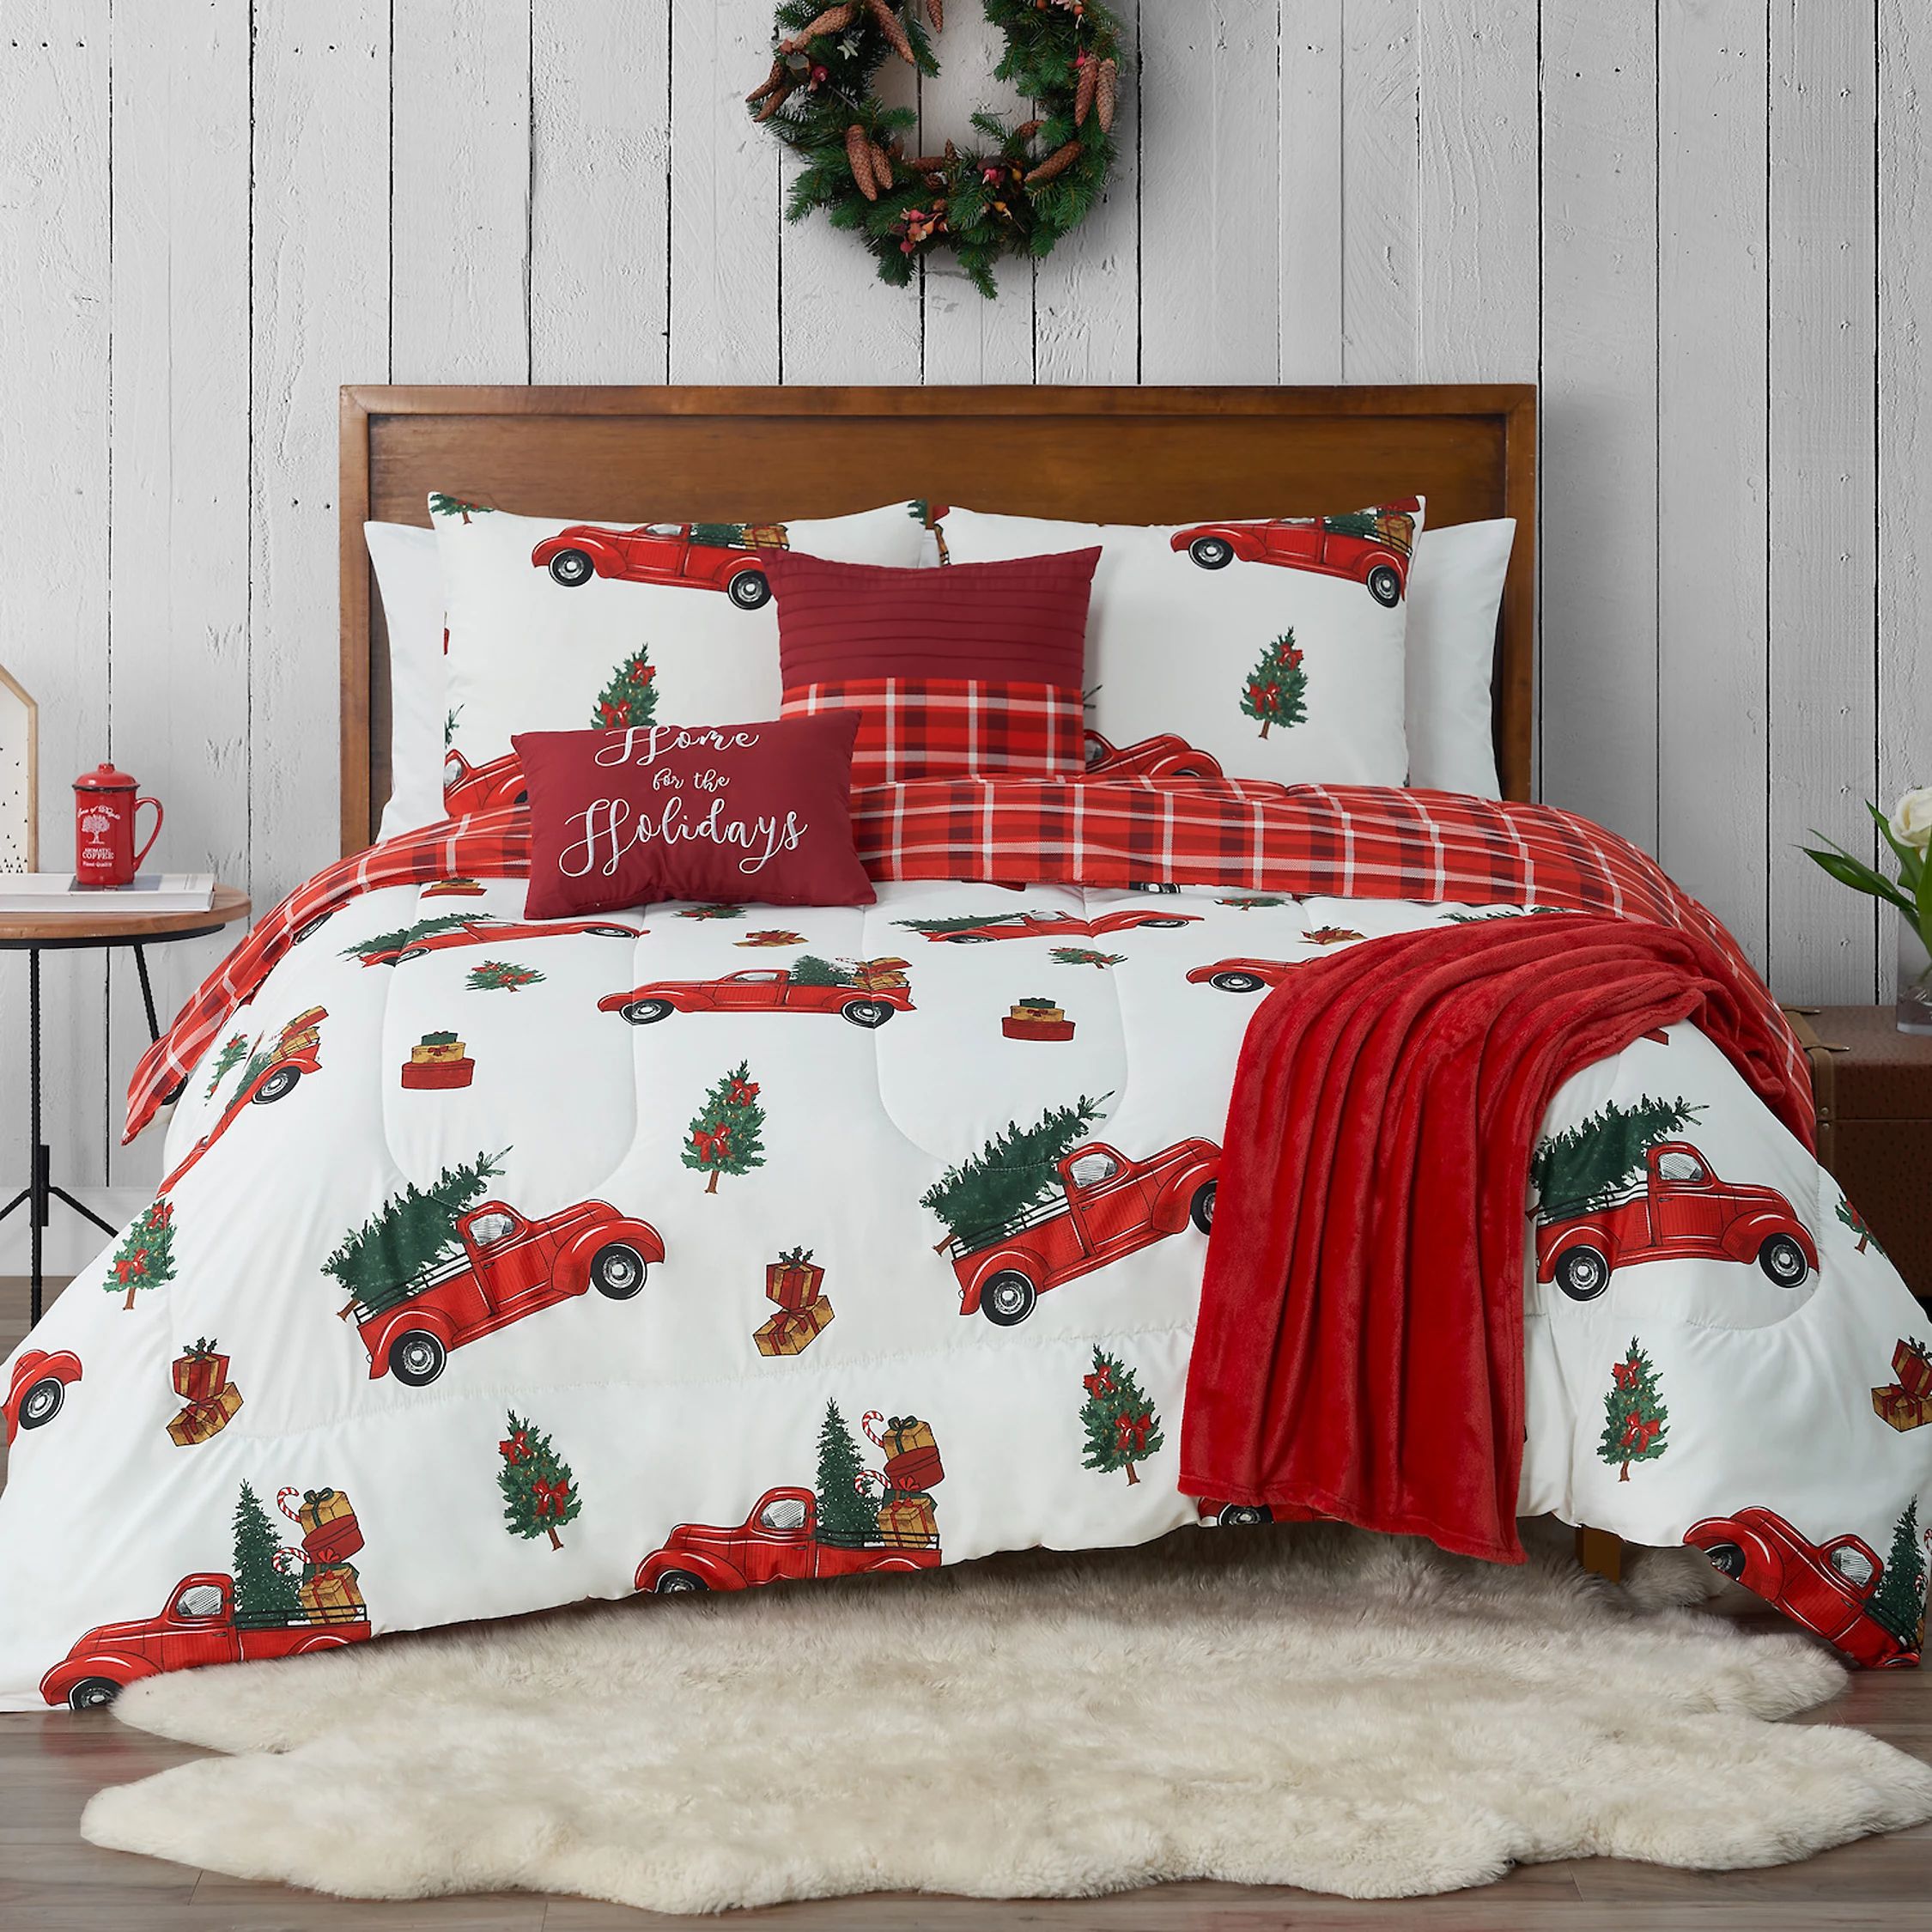 Threaded Home For the Holidays Comforter Set with Shams | Kohl's